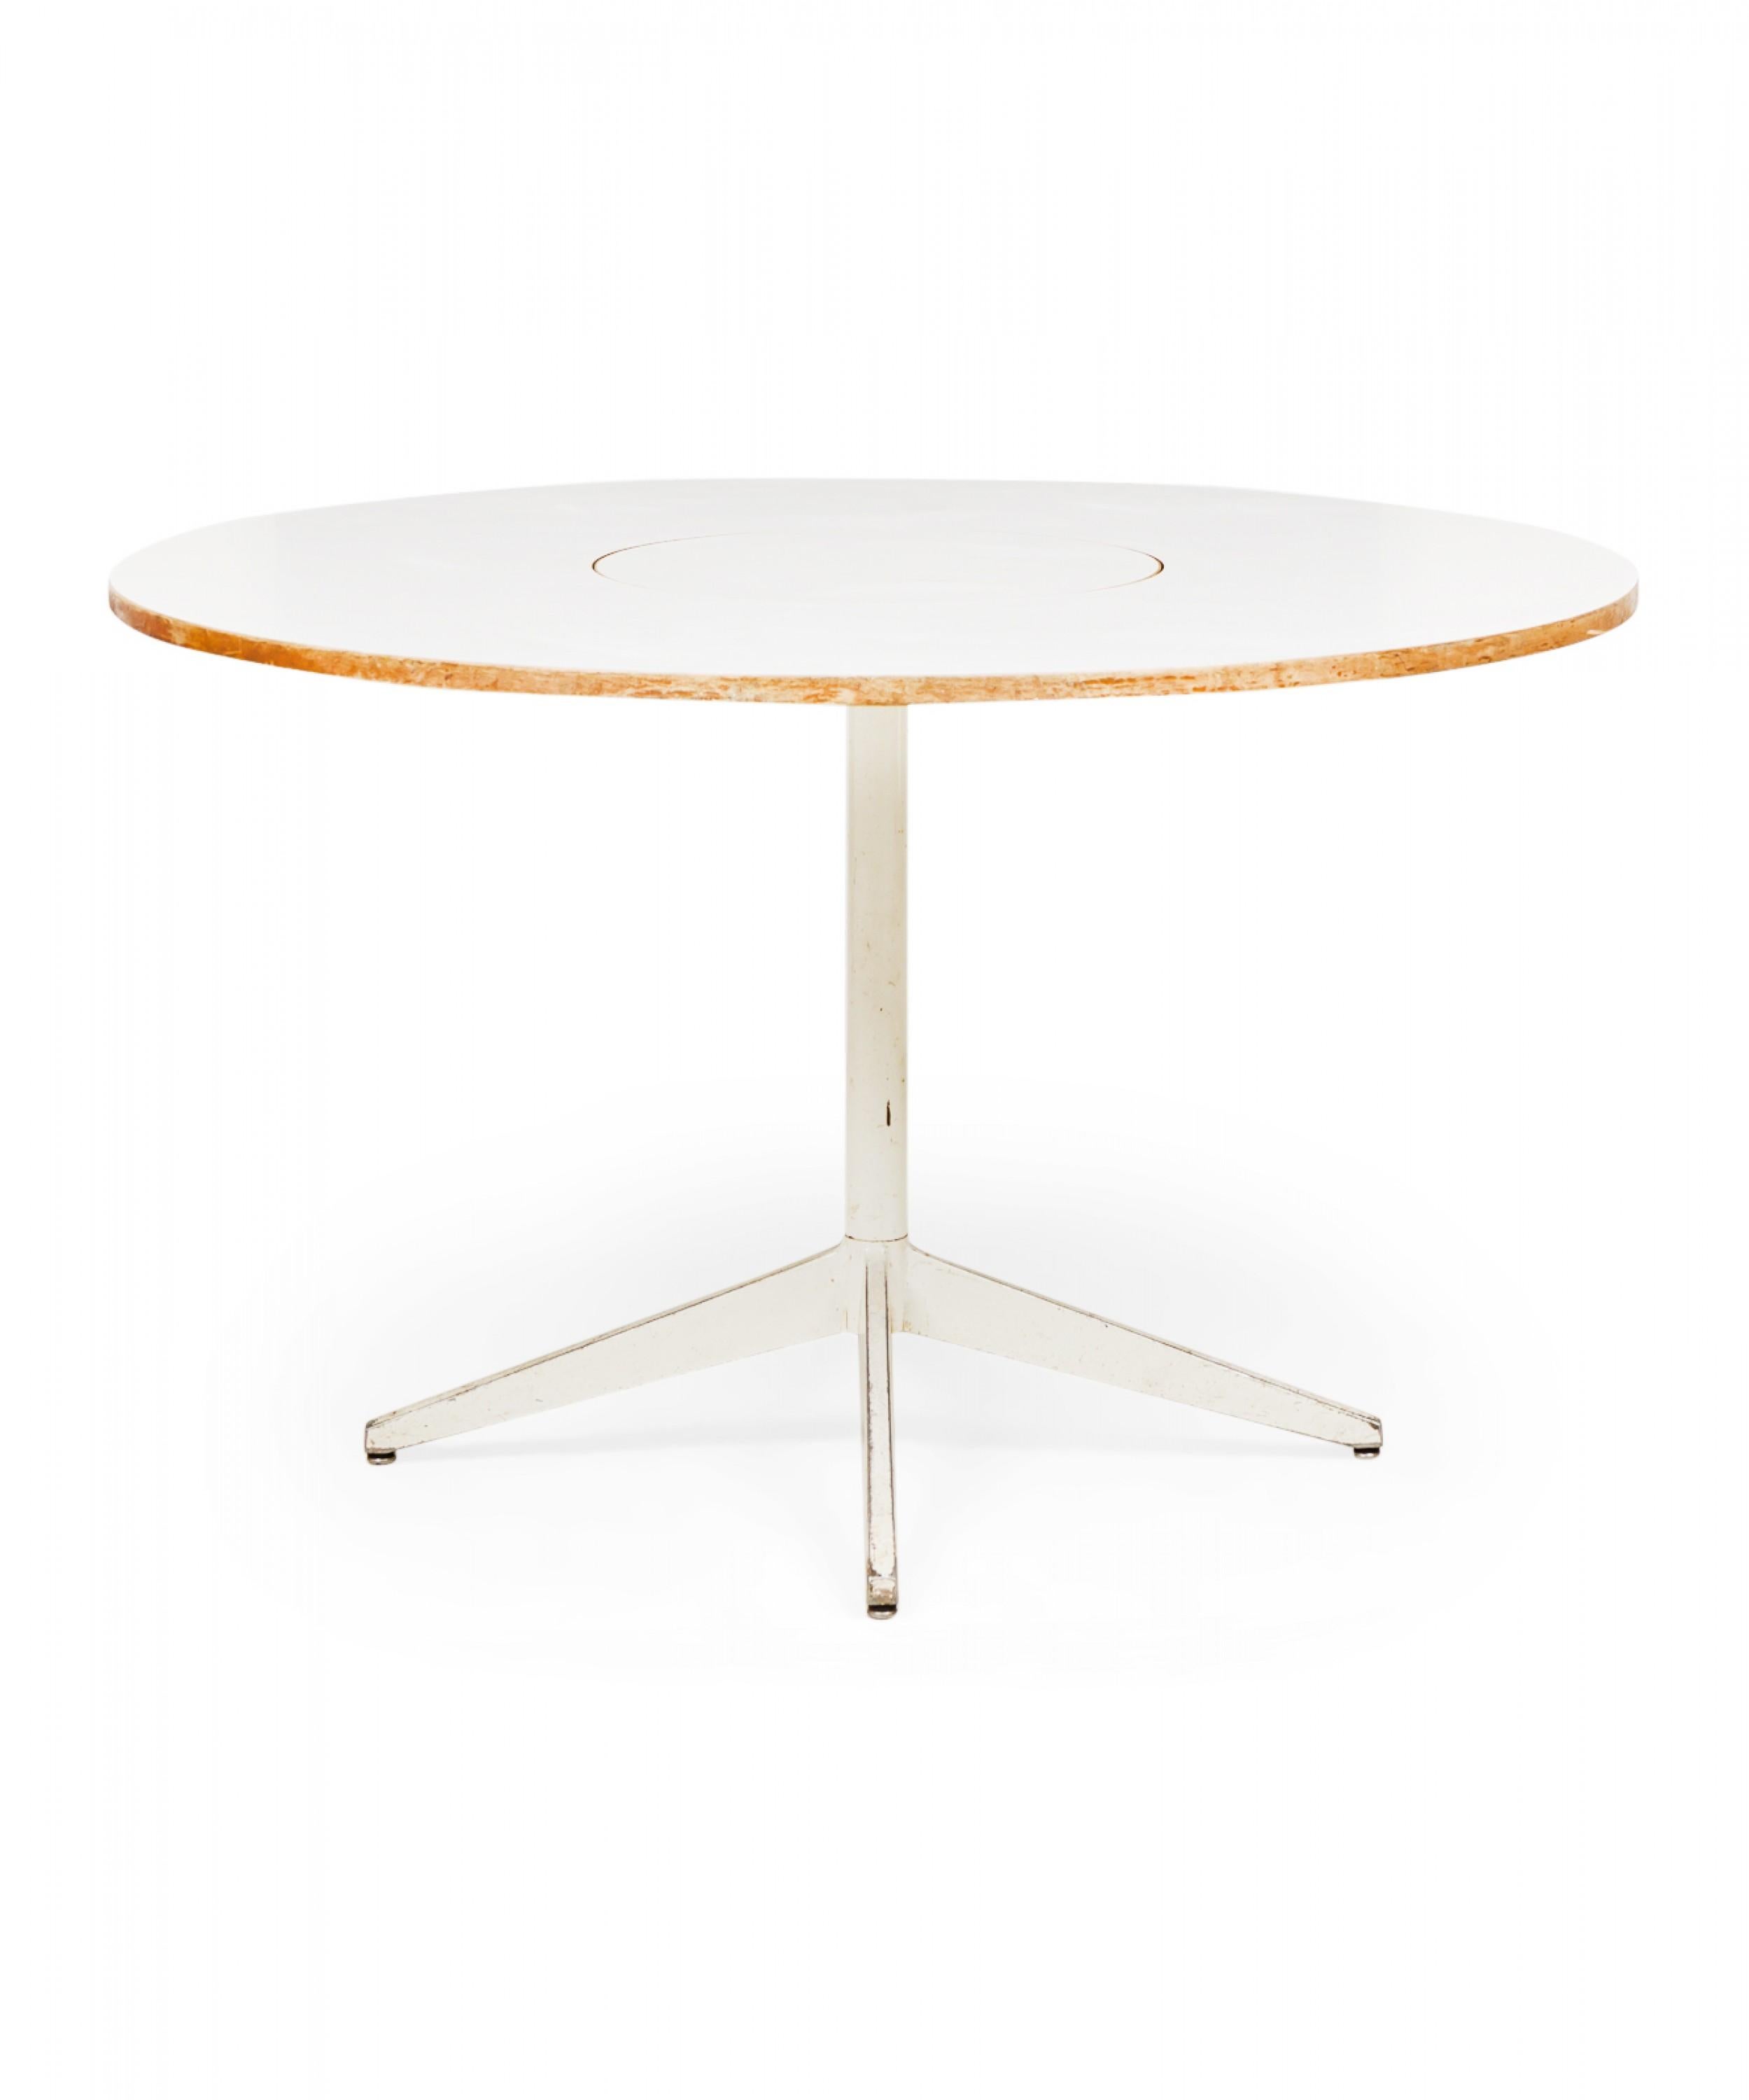 American Mid-Century circular dining table with a white laminate top featuring a central lazy susan circular section that rotates, resting on a white powder coated metal pedestal base with four angled legs. (GEORGE NELSON FOR HERMAN MILLER)